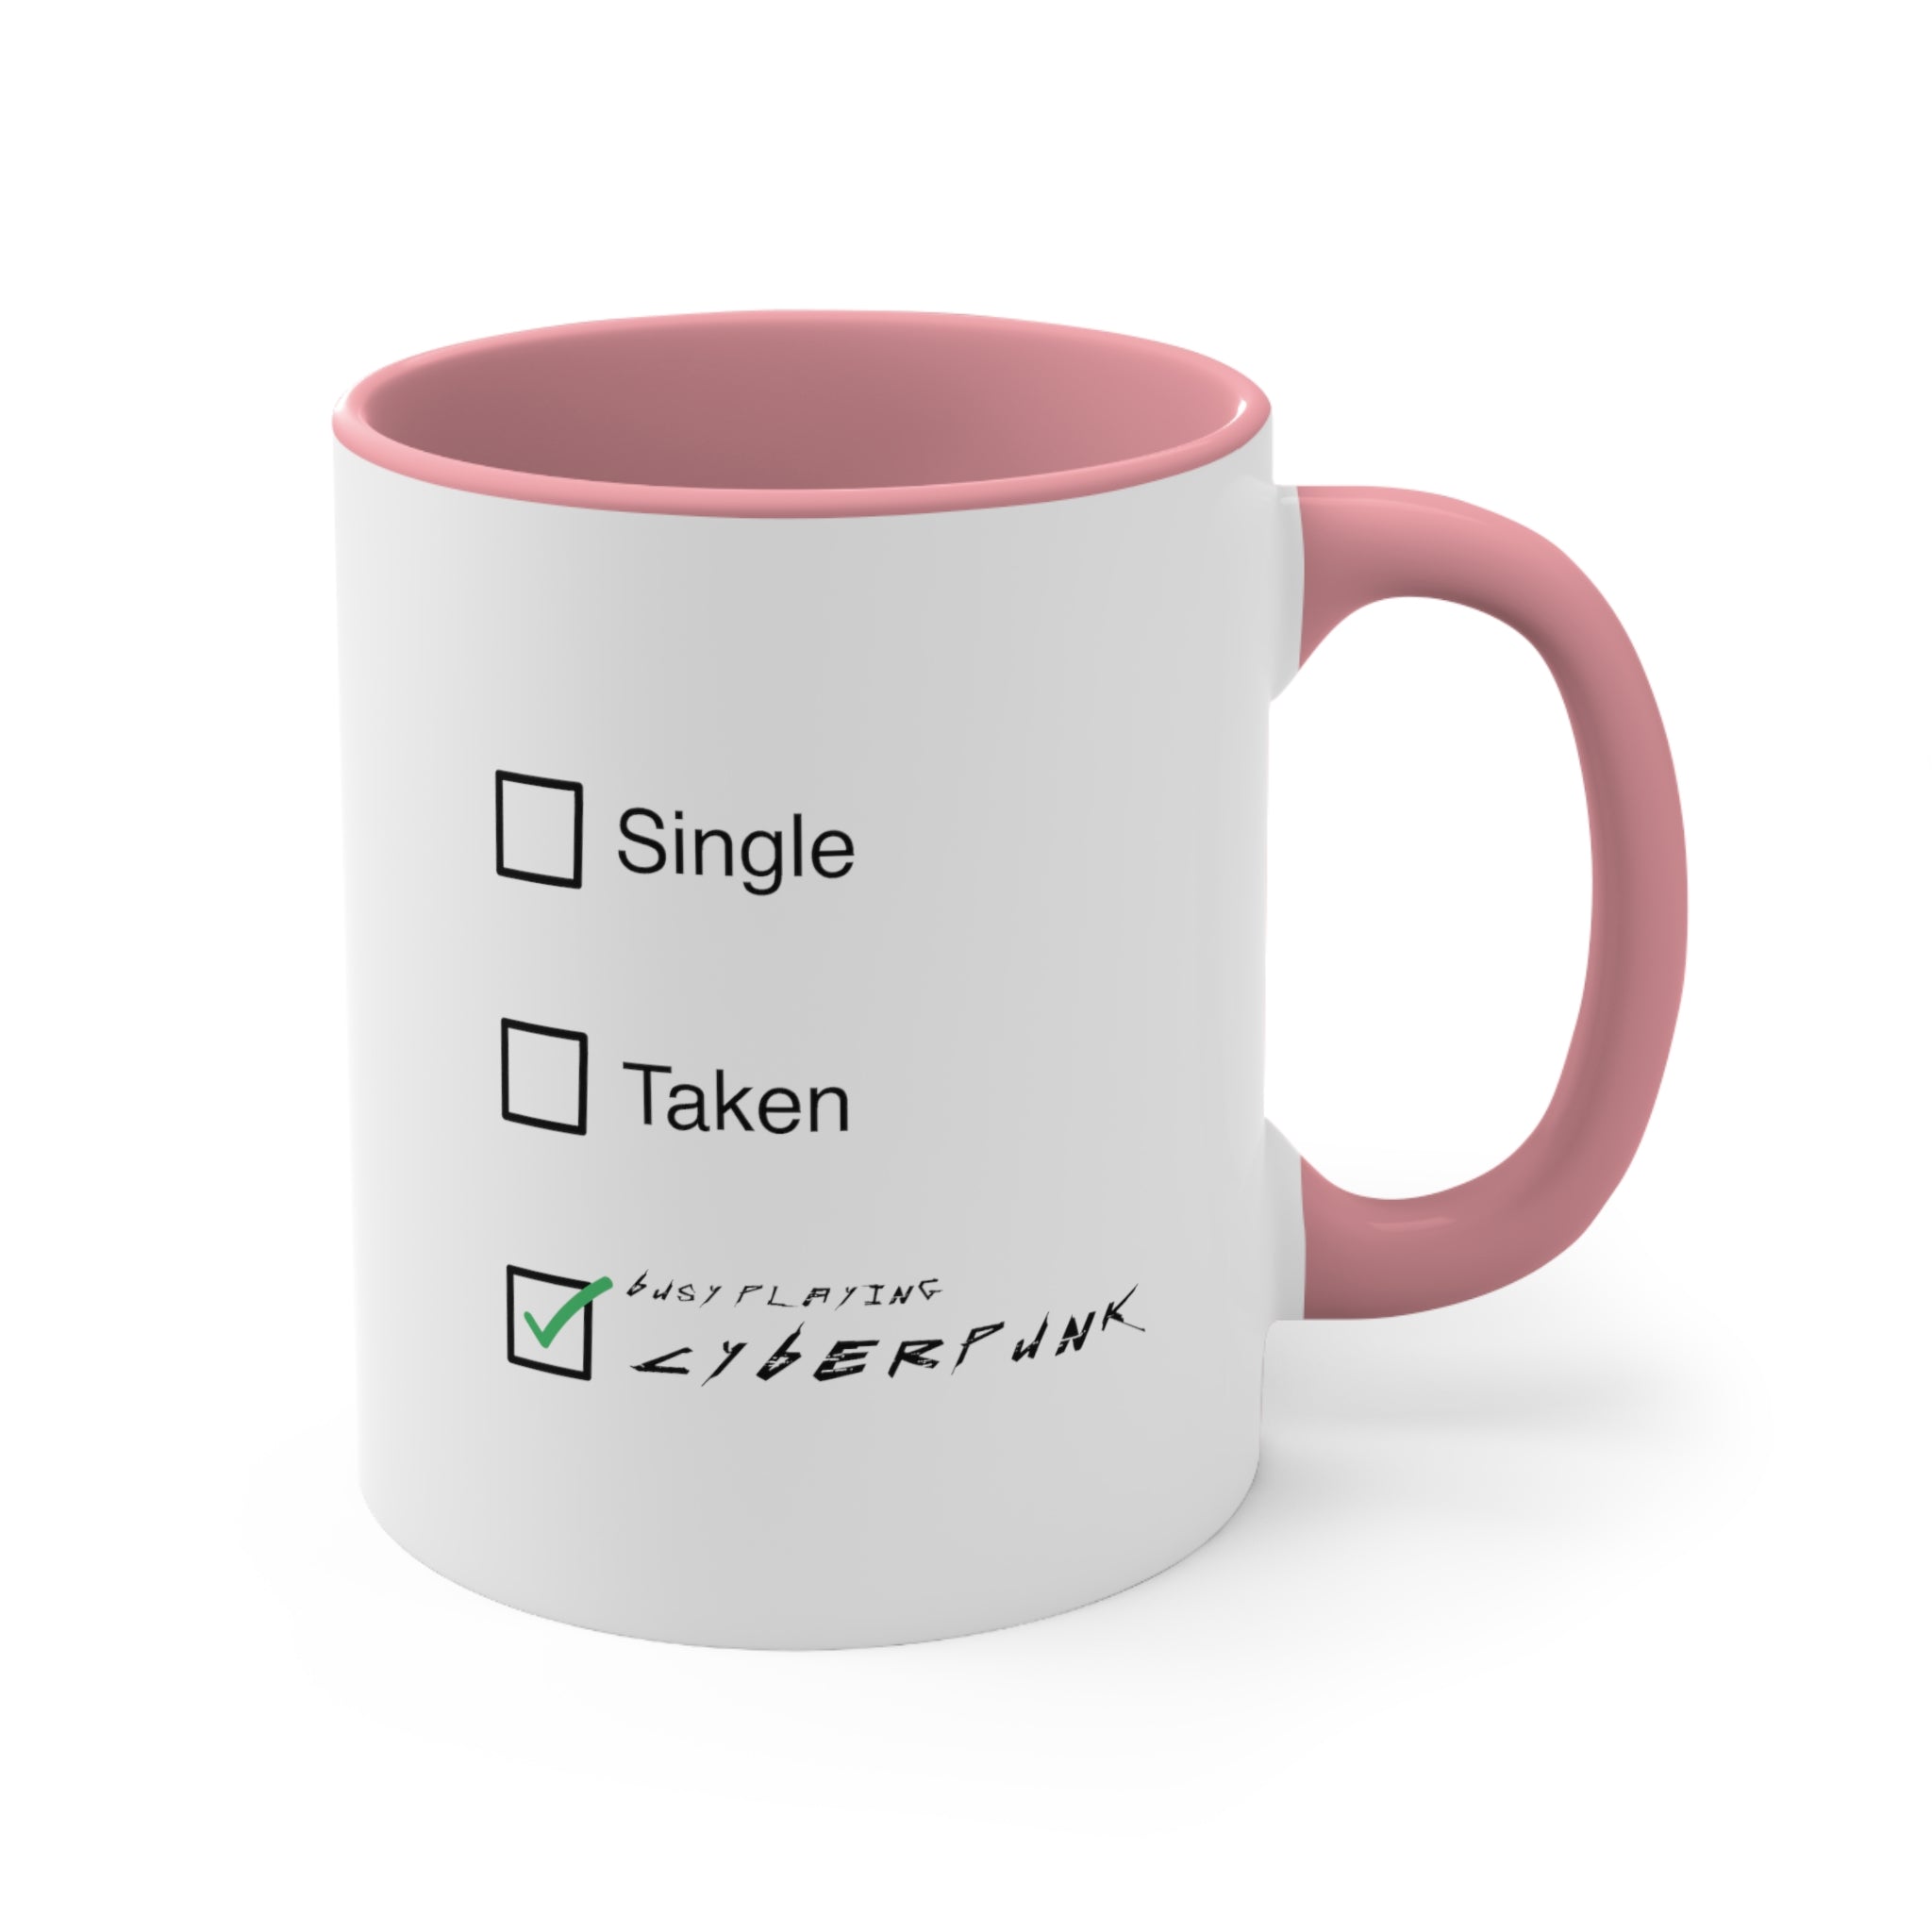 Cyberpunk Funny Single Taken Coffee Mug, 11oz 2077 Cups Mugs Cup Gamer Gift For Him Her Game Cup Cups Mugs Birthday Christmas Valentine's Anniversary Gifts